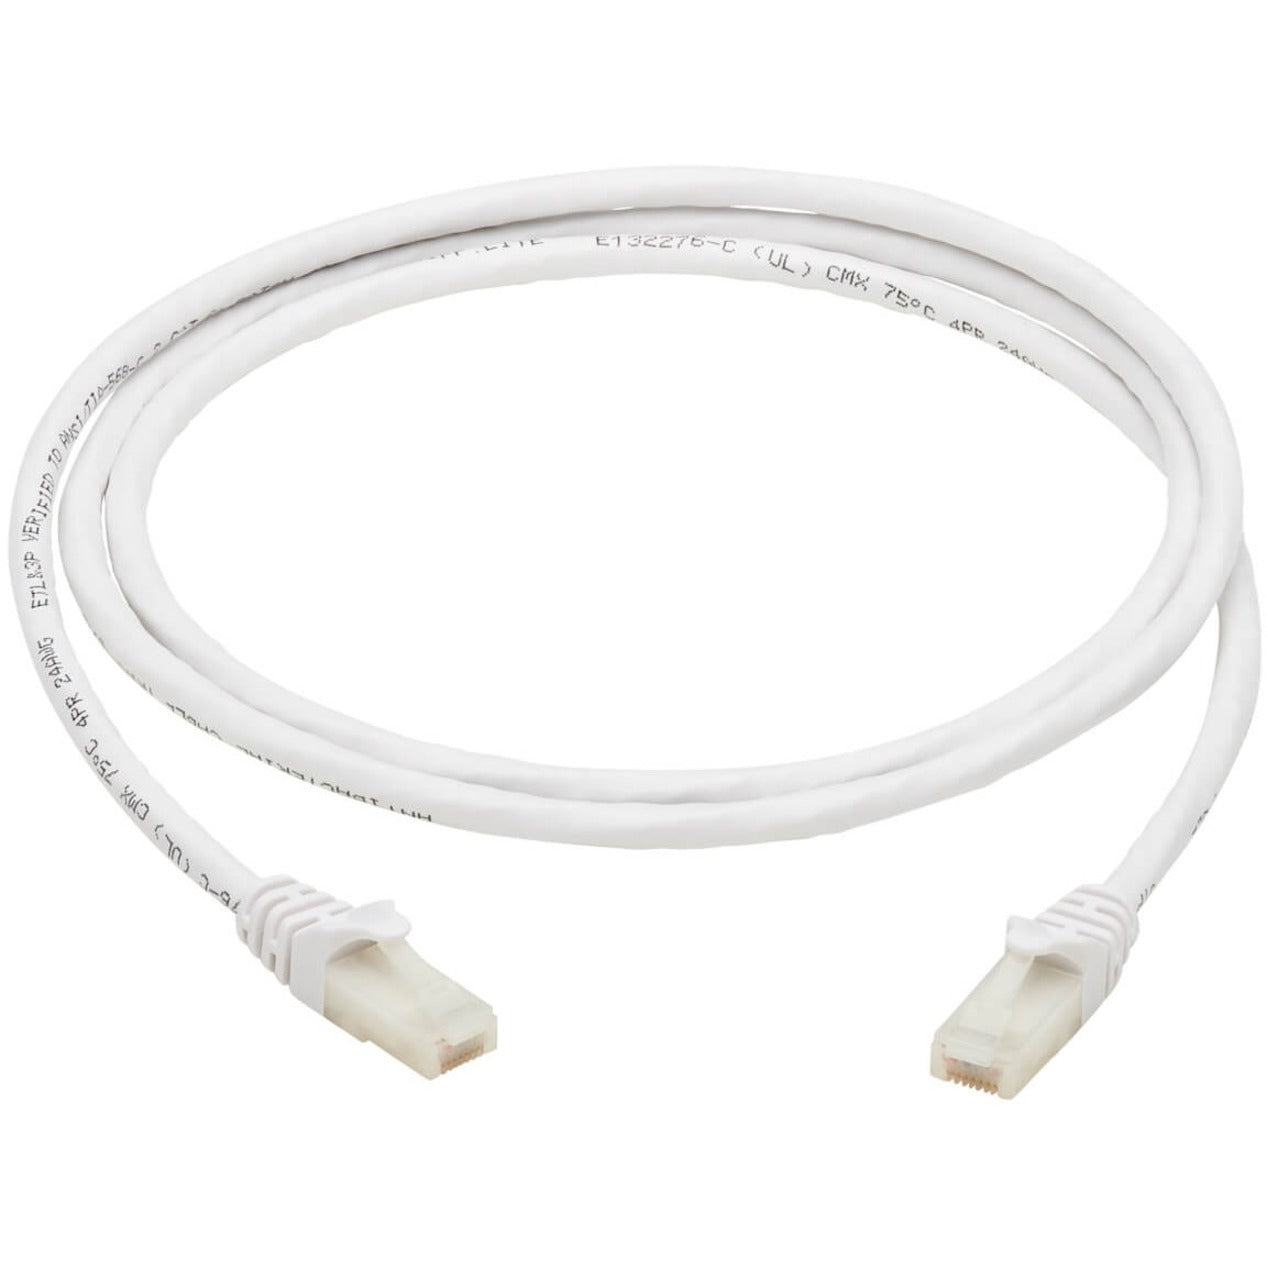 Tripp Lite by Eaton N261AB-003-WH Cat.6a UTP Network Cable, High-Speed Data Transfer